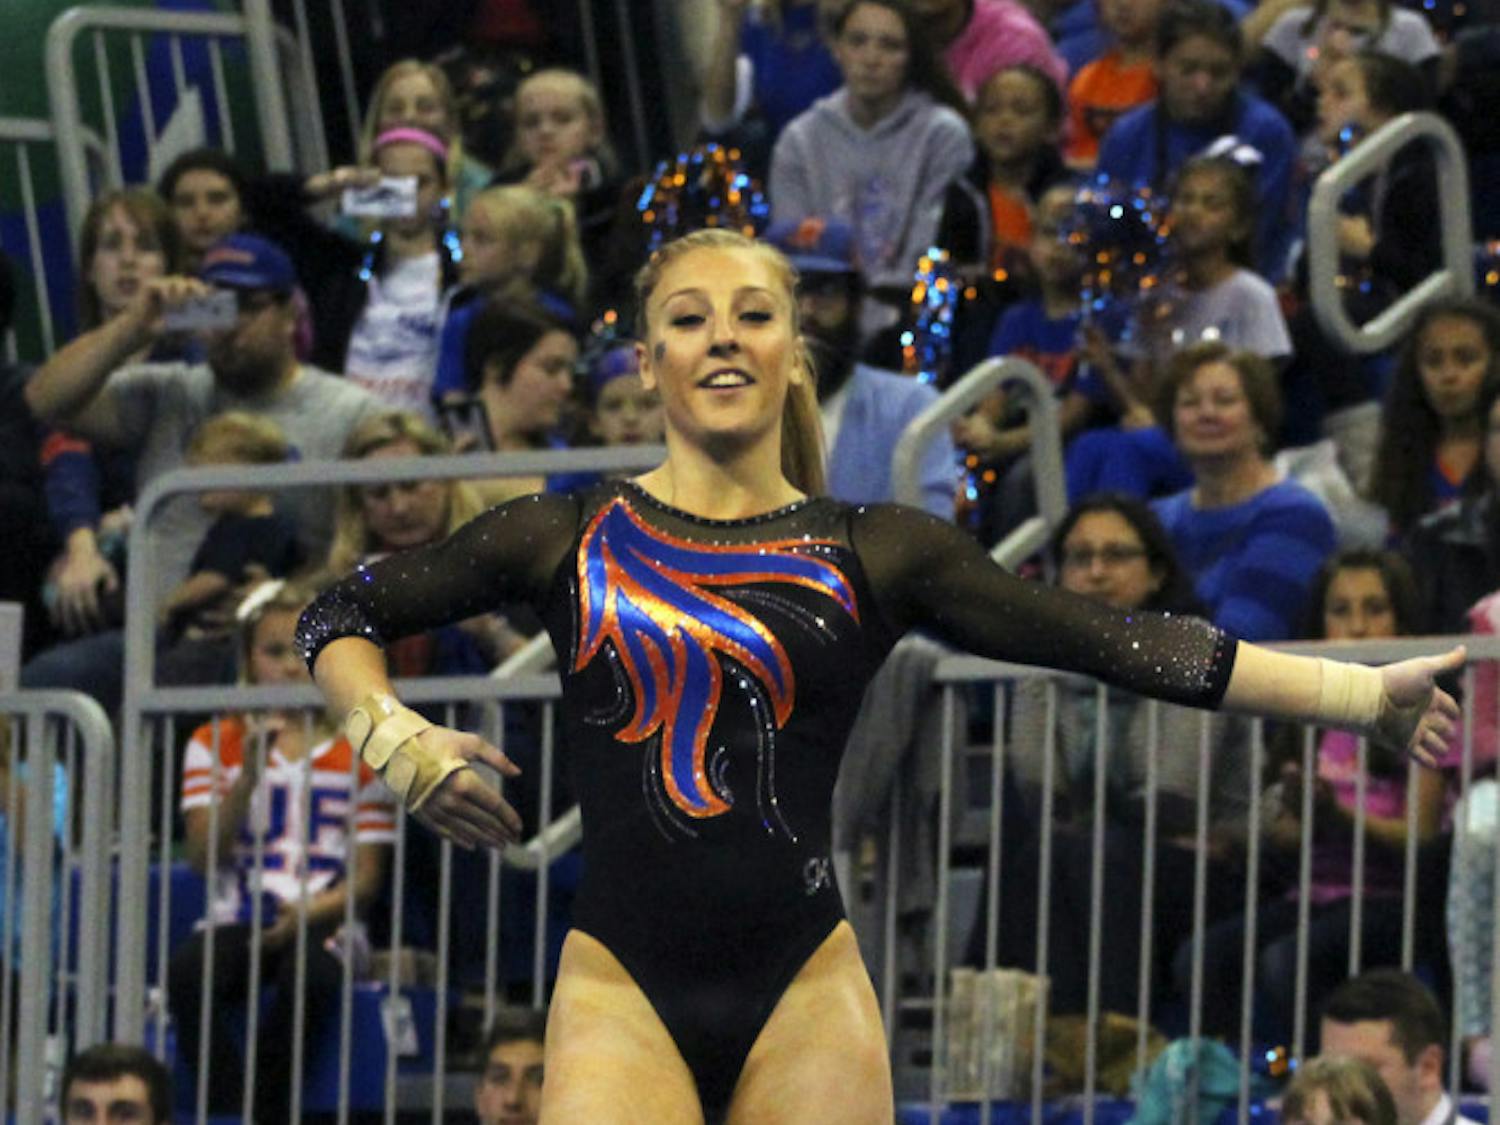 Alex McMurtry performs on floor during Florida's loss to LSU on Feb. 26, 2016 in the O'Connell Center.